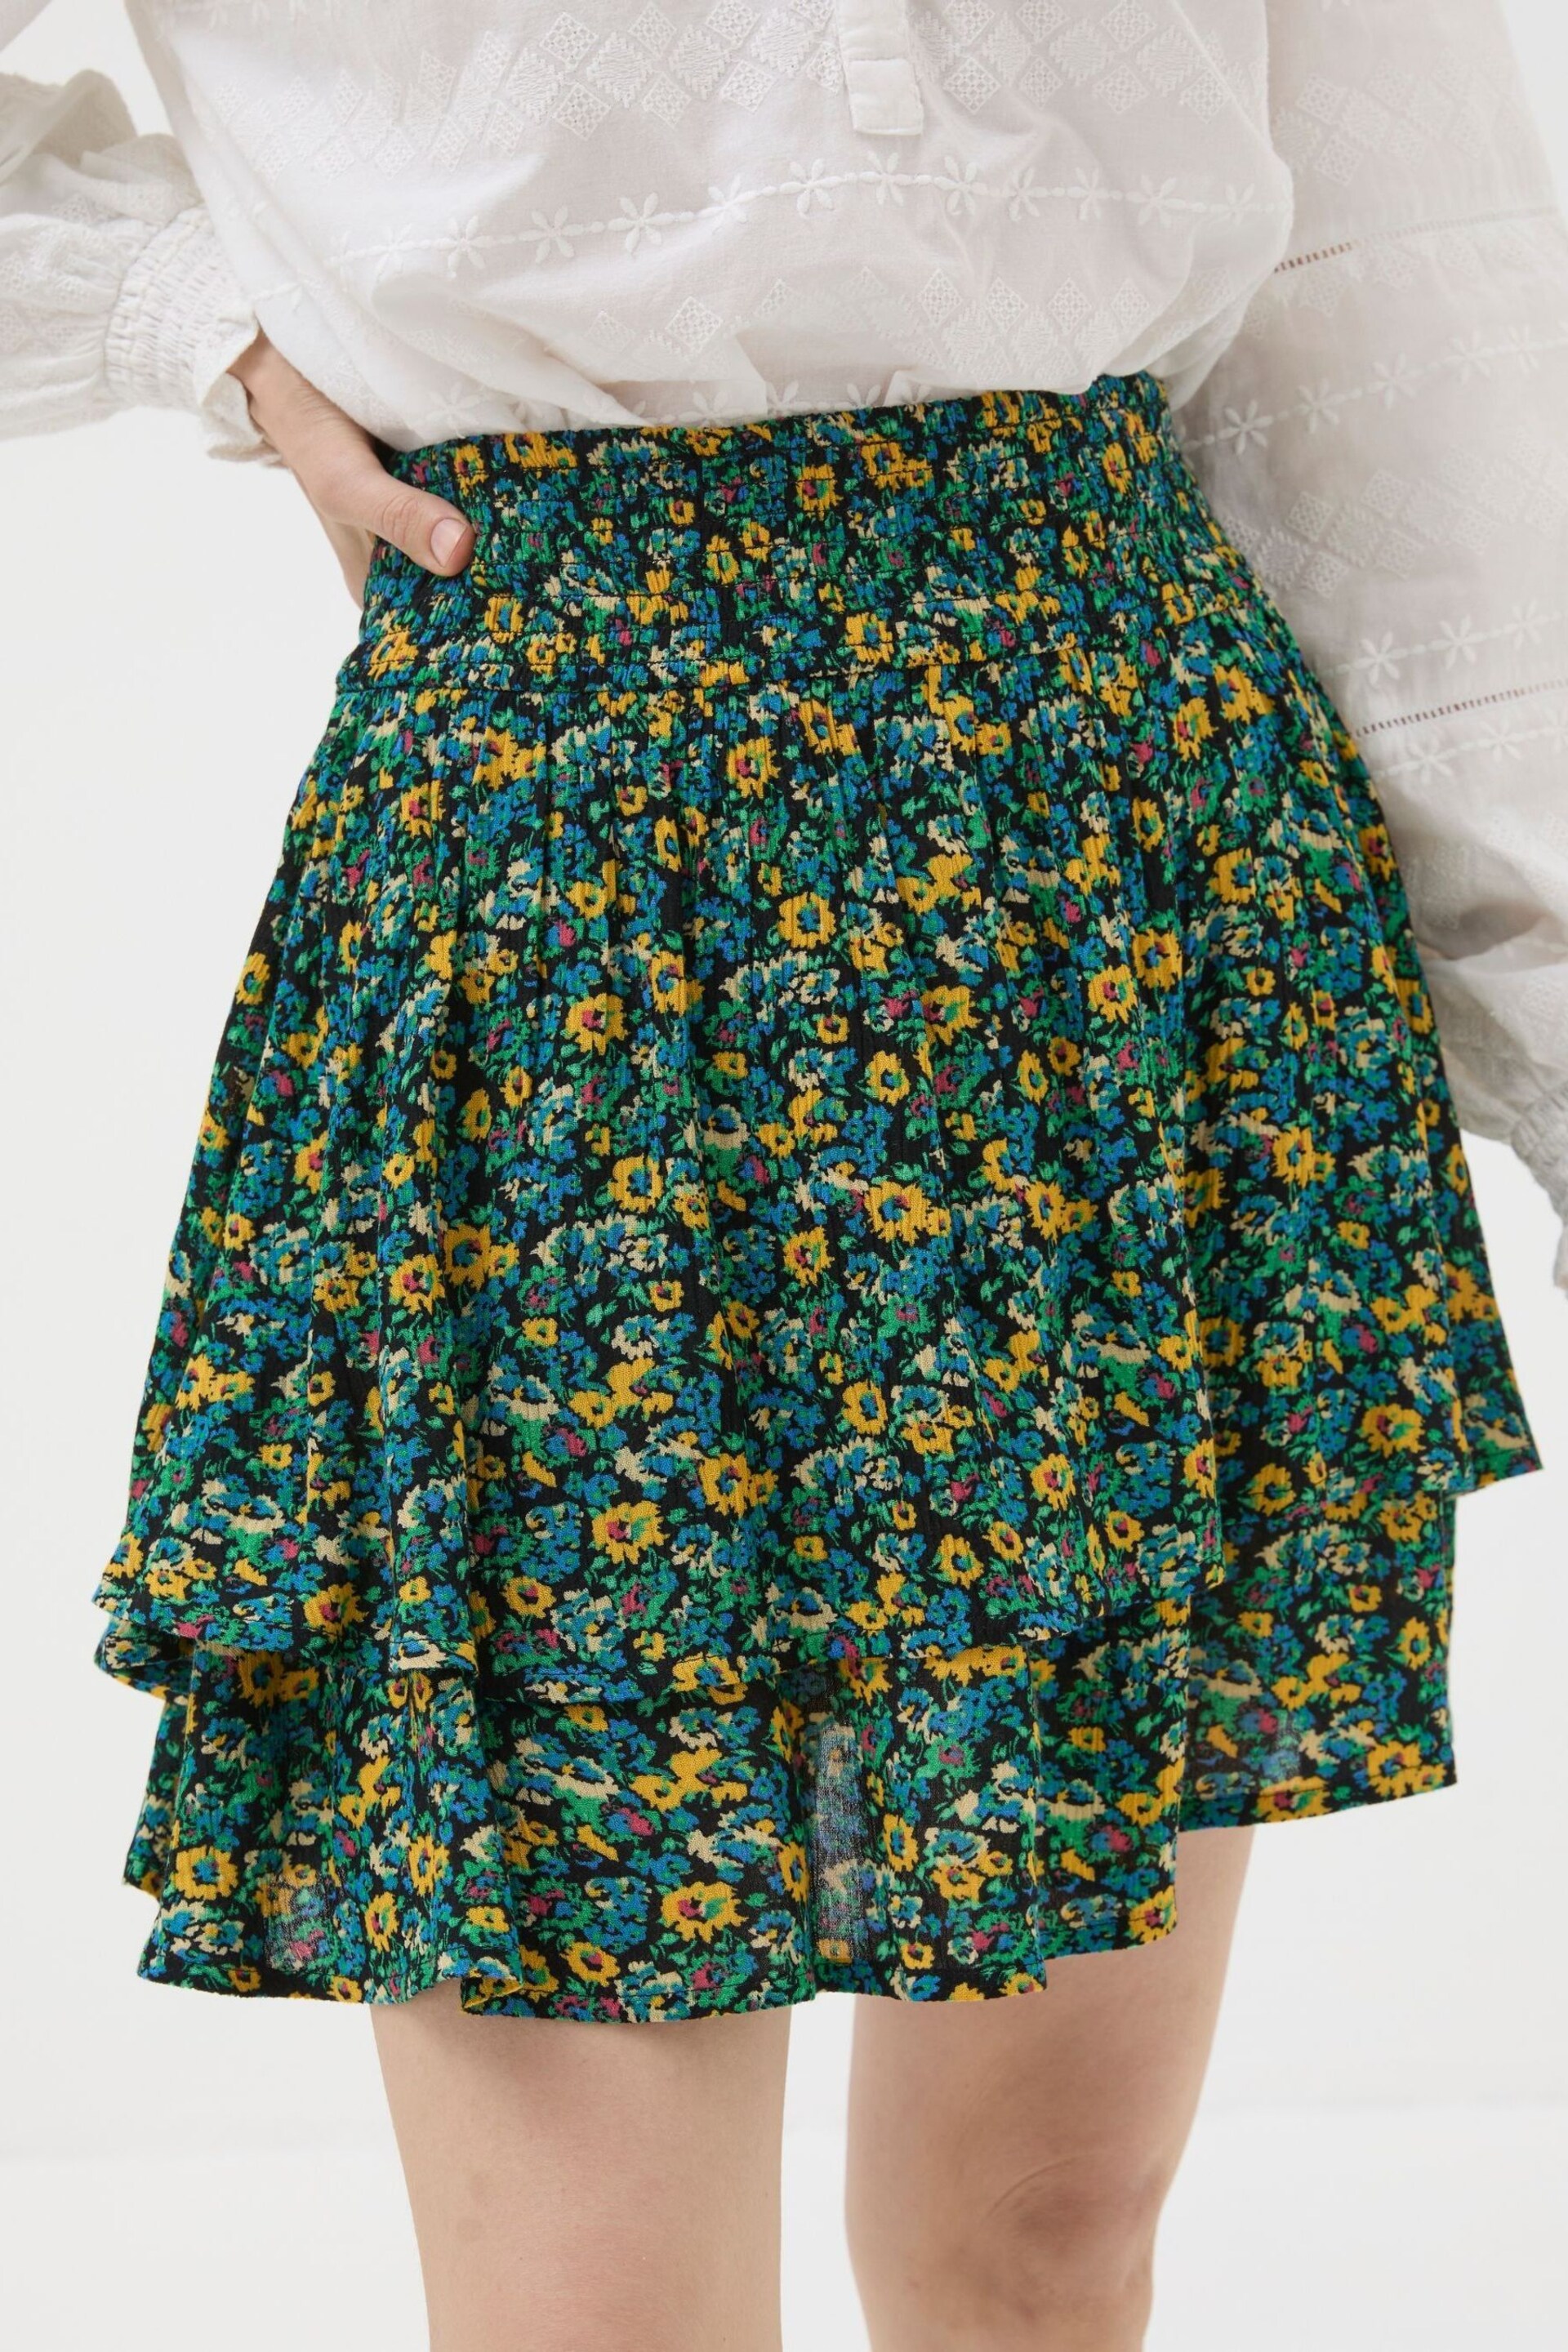 FatFace Green Spring Floral Skirt - Image 2 of 5